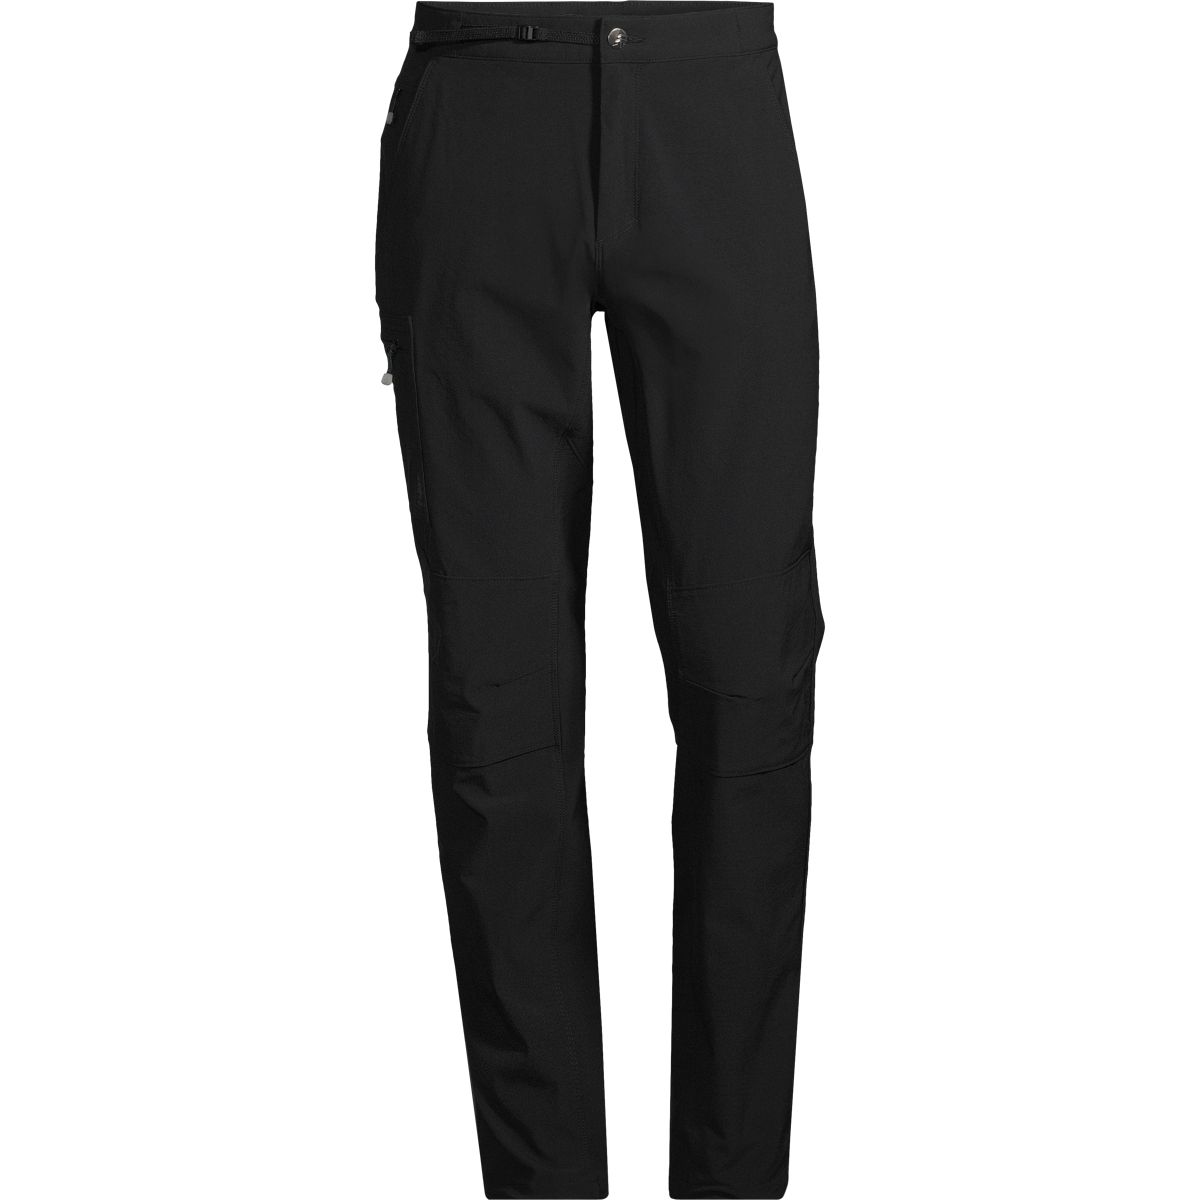 https://media-www.sportchek.ca/product/div-03-softgoods/dpt-72-casual-clothing/sdpt-01-mens/334118051/woods-men-s-couldrey-trekking-pants-b81c6719-42cb-4d48-b2f9-076e31199beb-jpgrendition.jpg?imdensity=1&imwidth=1244&impolicy=mZoom